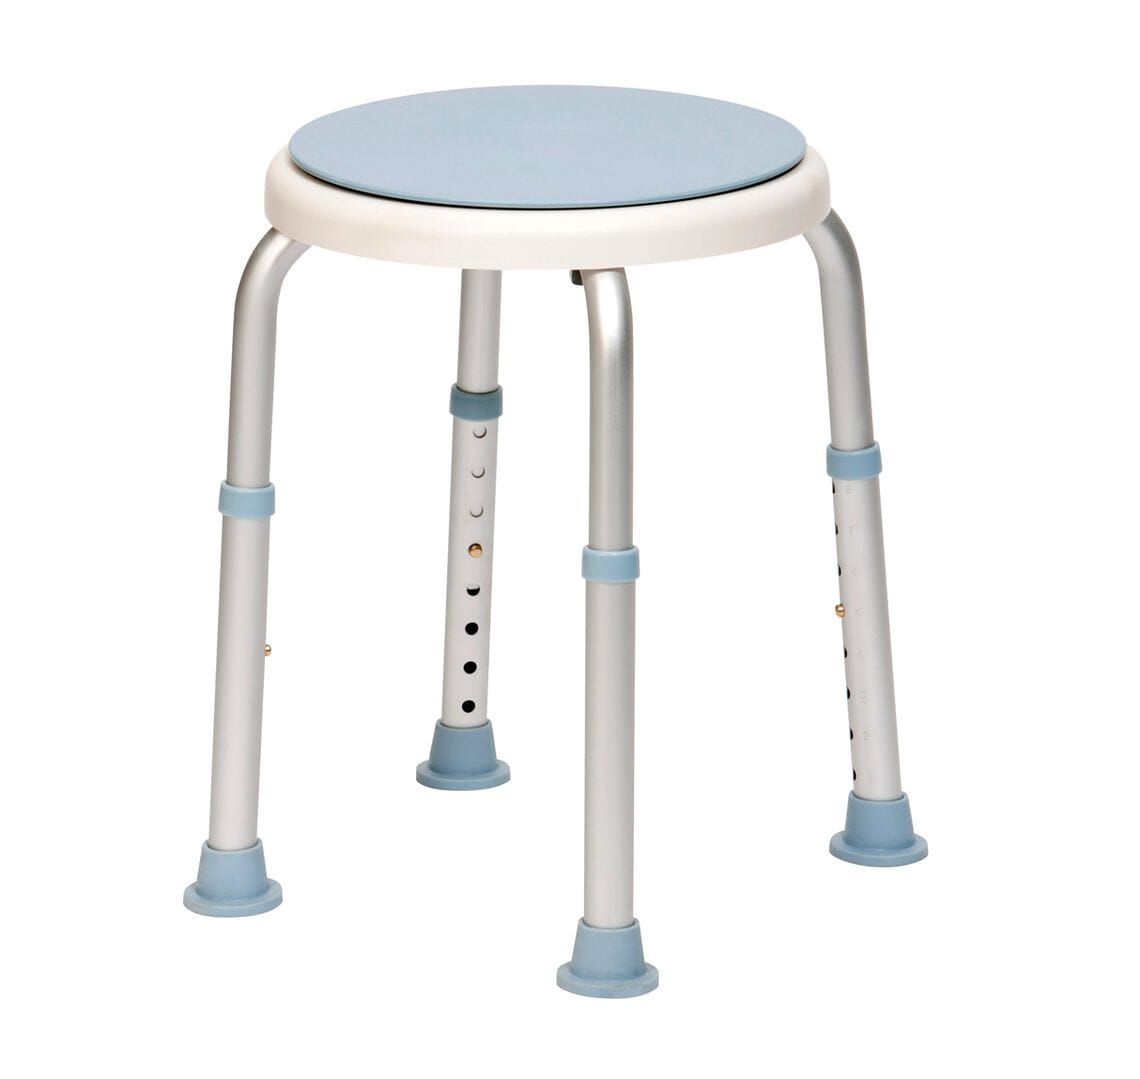 View Bath Stool with Rotating Seat information